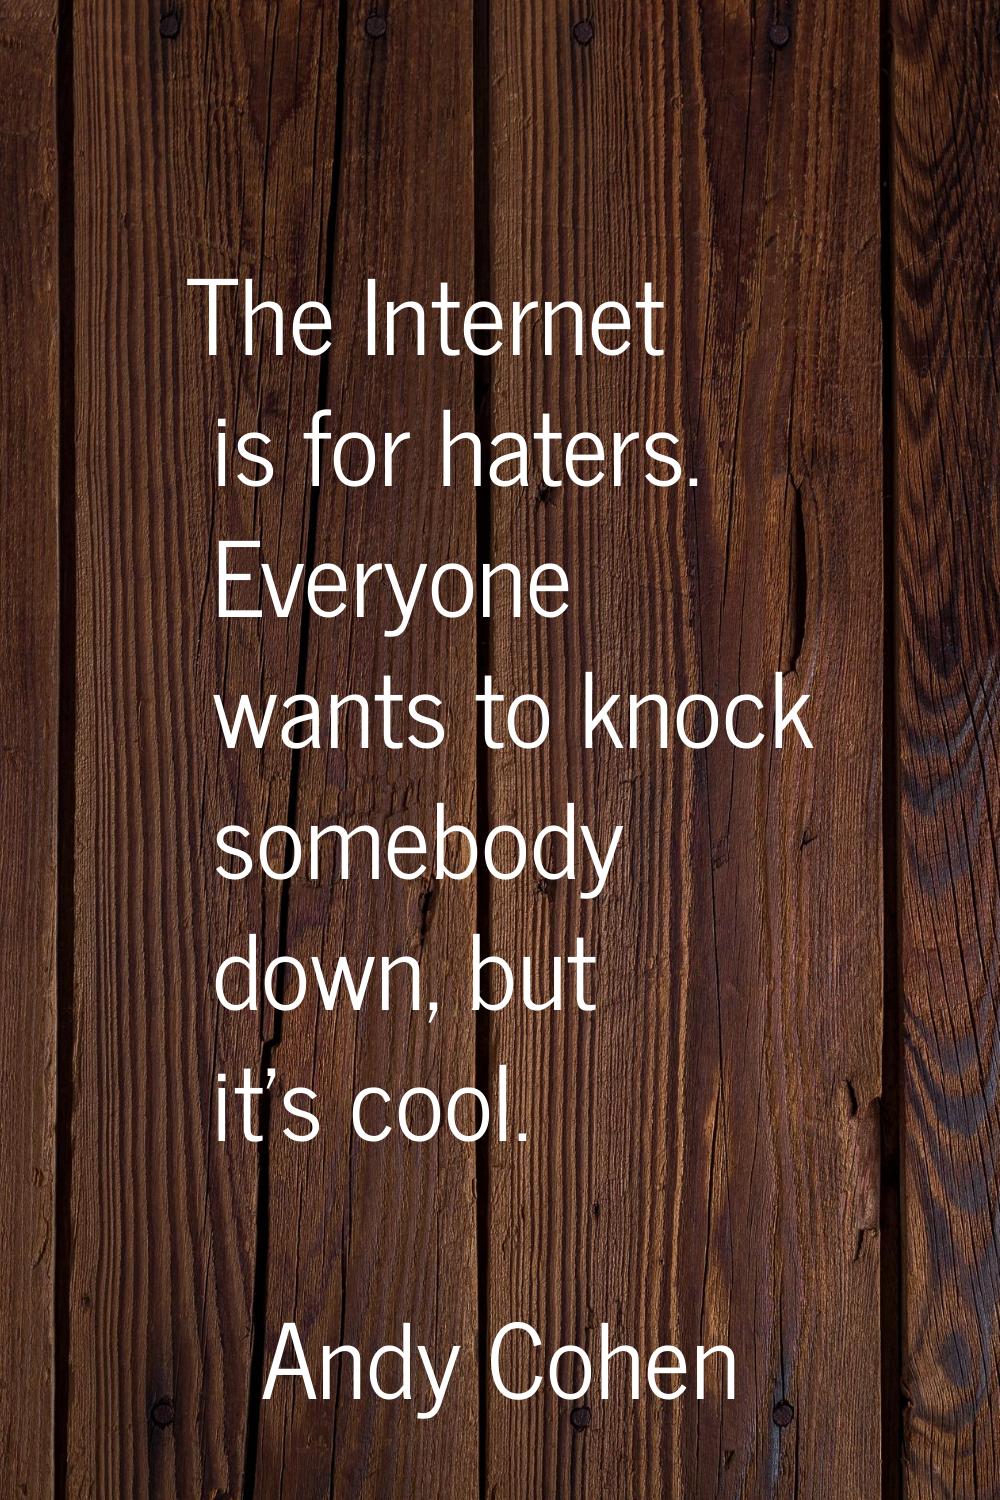 The Internet is for haters. Everyone wants to knock somebody down, but it's cool.